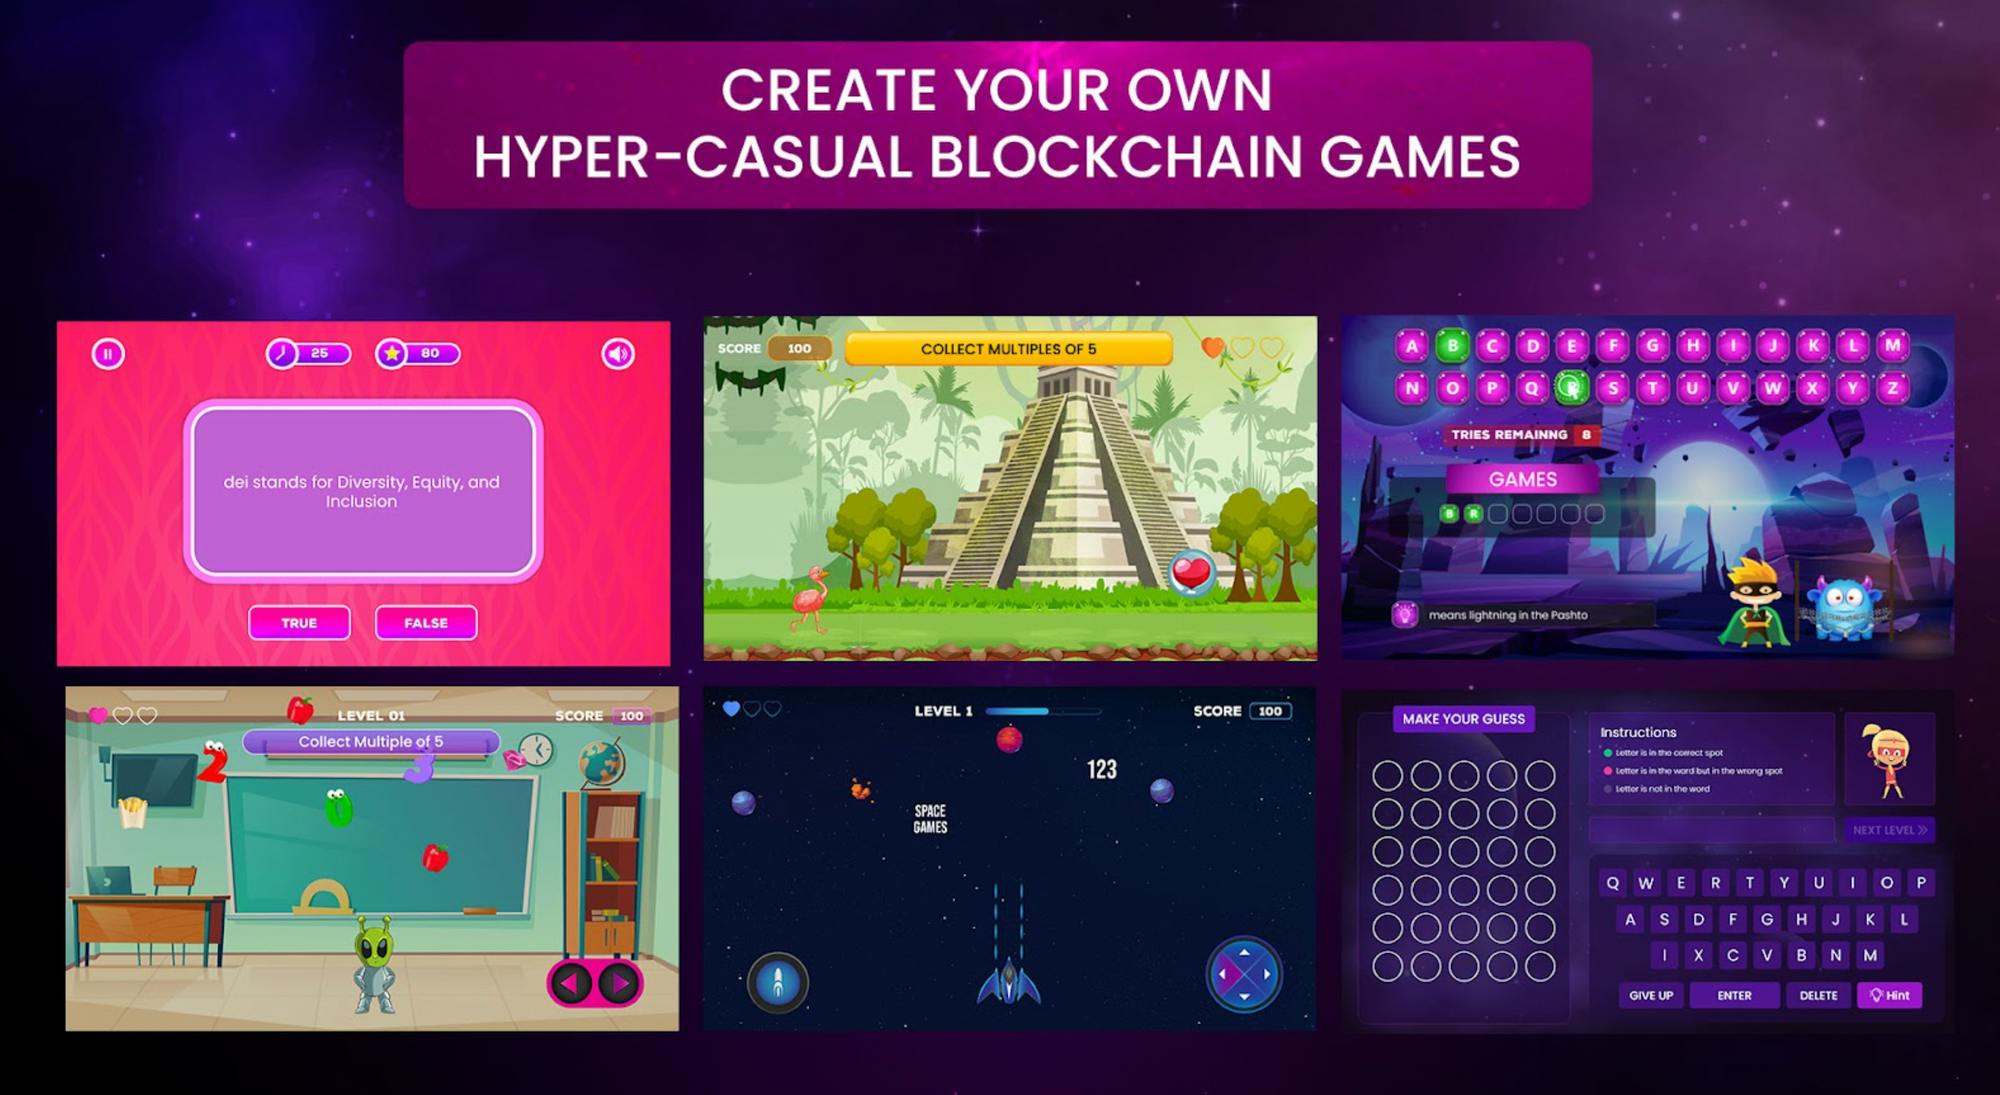 Create your own hyper-casual blockchain games!